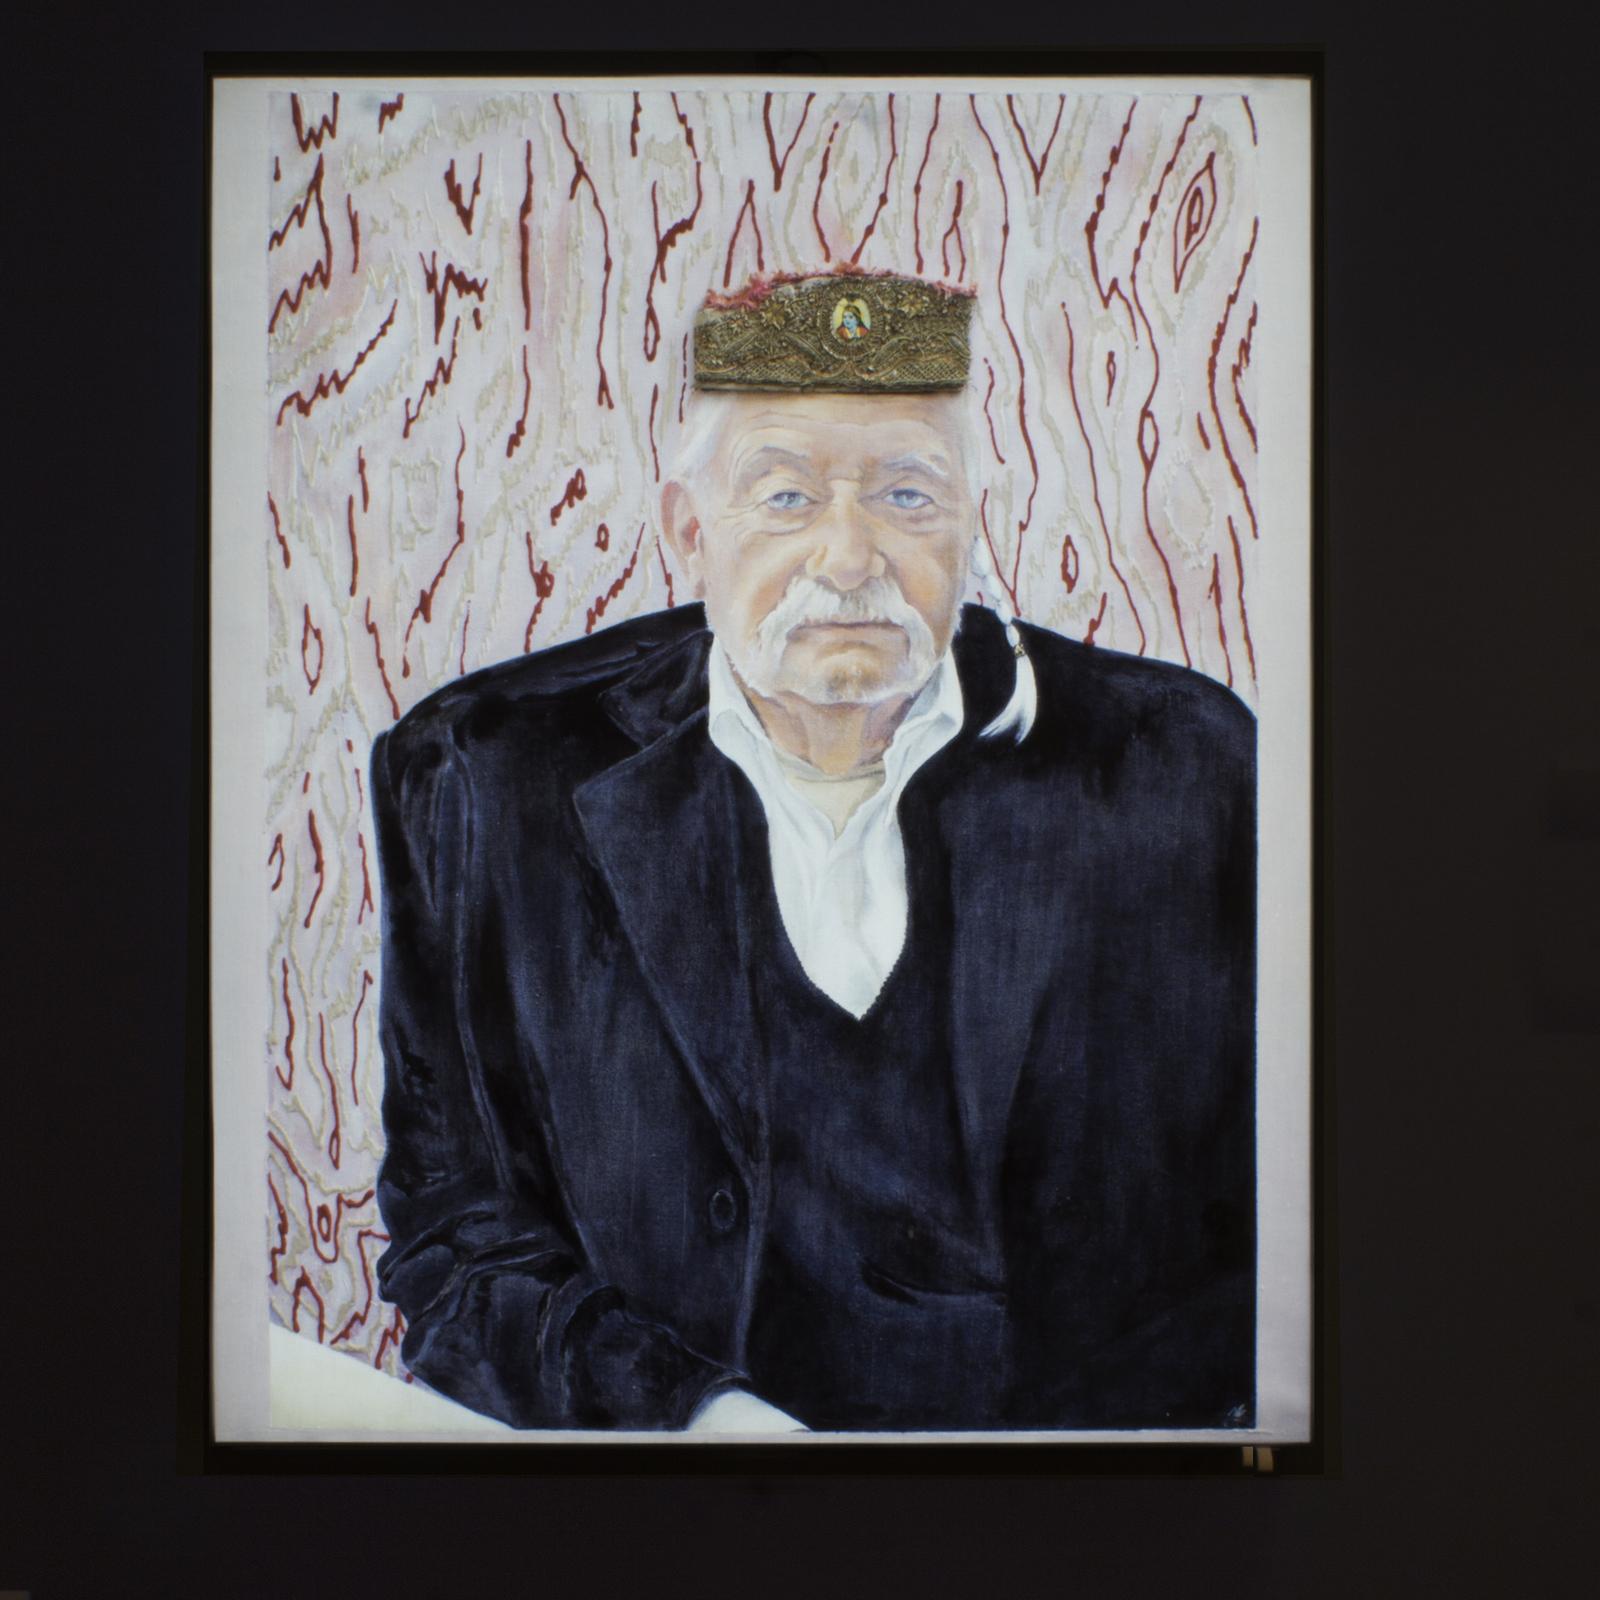 This striking painting of Italian architect and designer Ettore Sottsass is part of a limited edition of 20 pieces by designer Nuala Goodman, included in the series 'Portraits from Milan' of charismatic figures from the world of Italian design. This